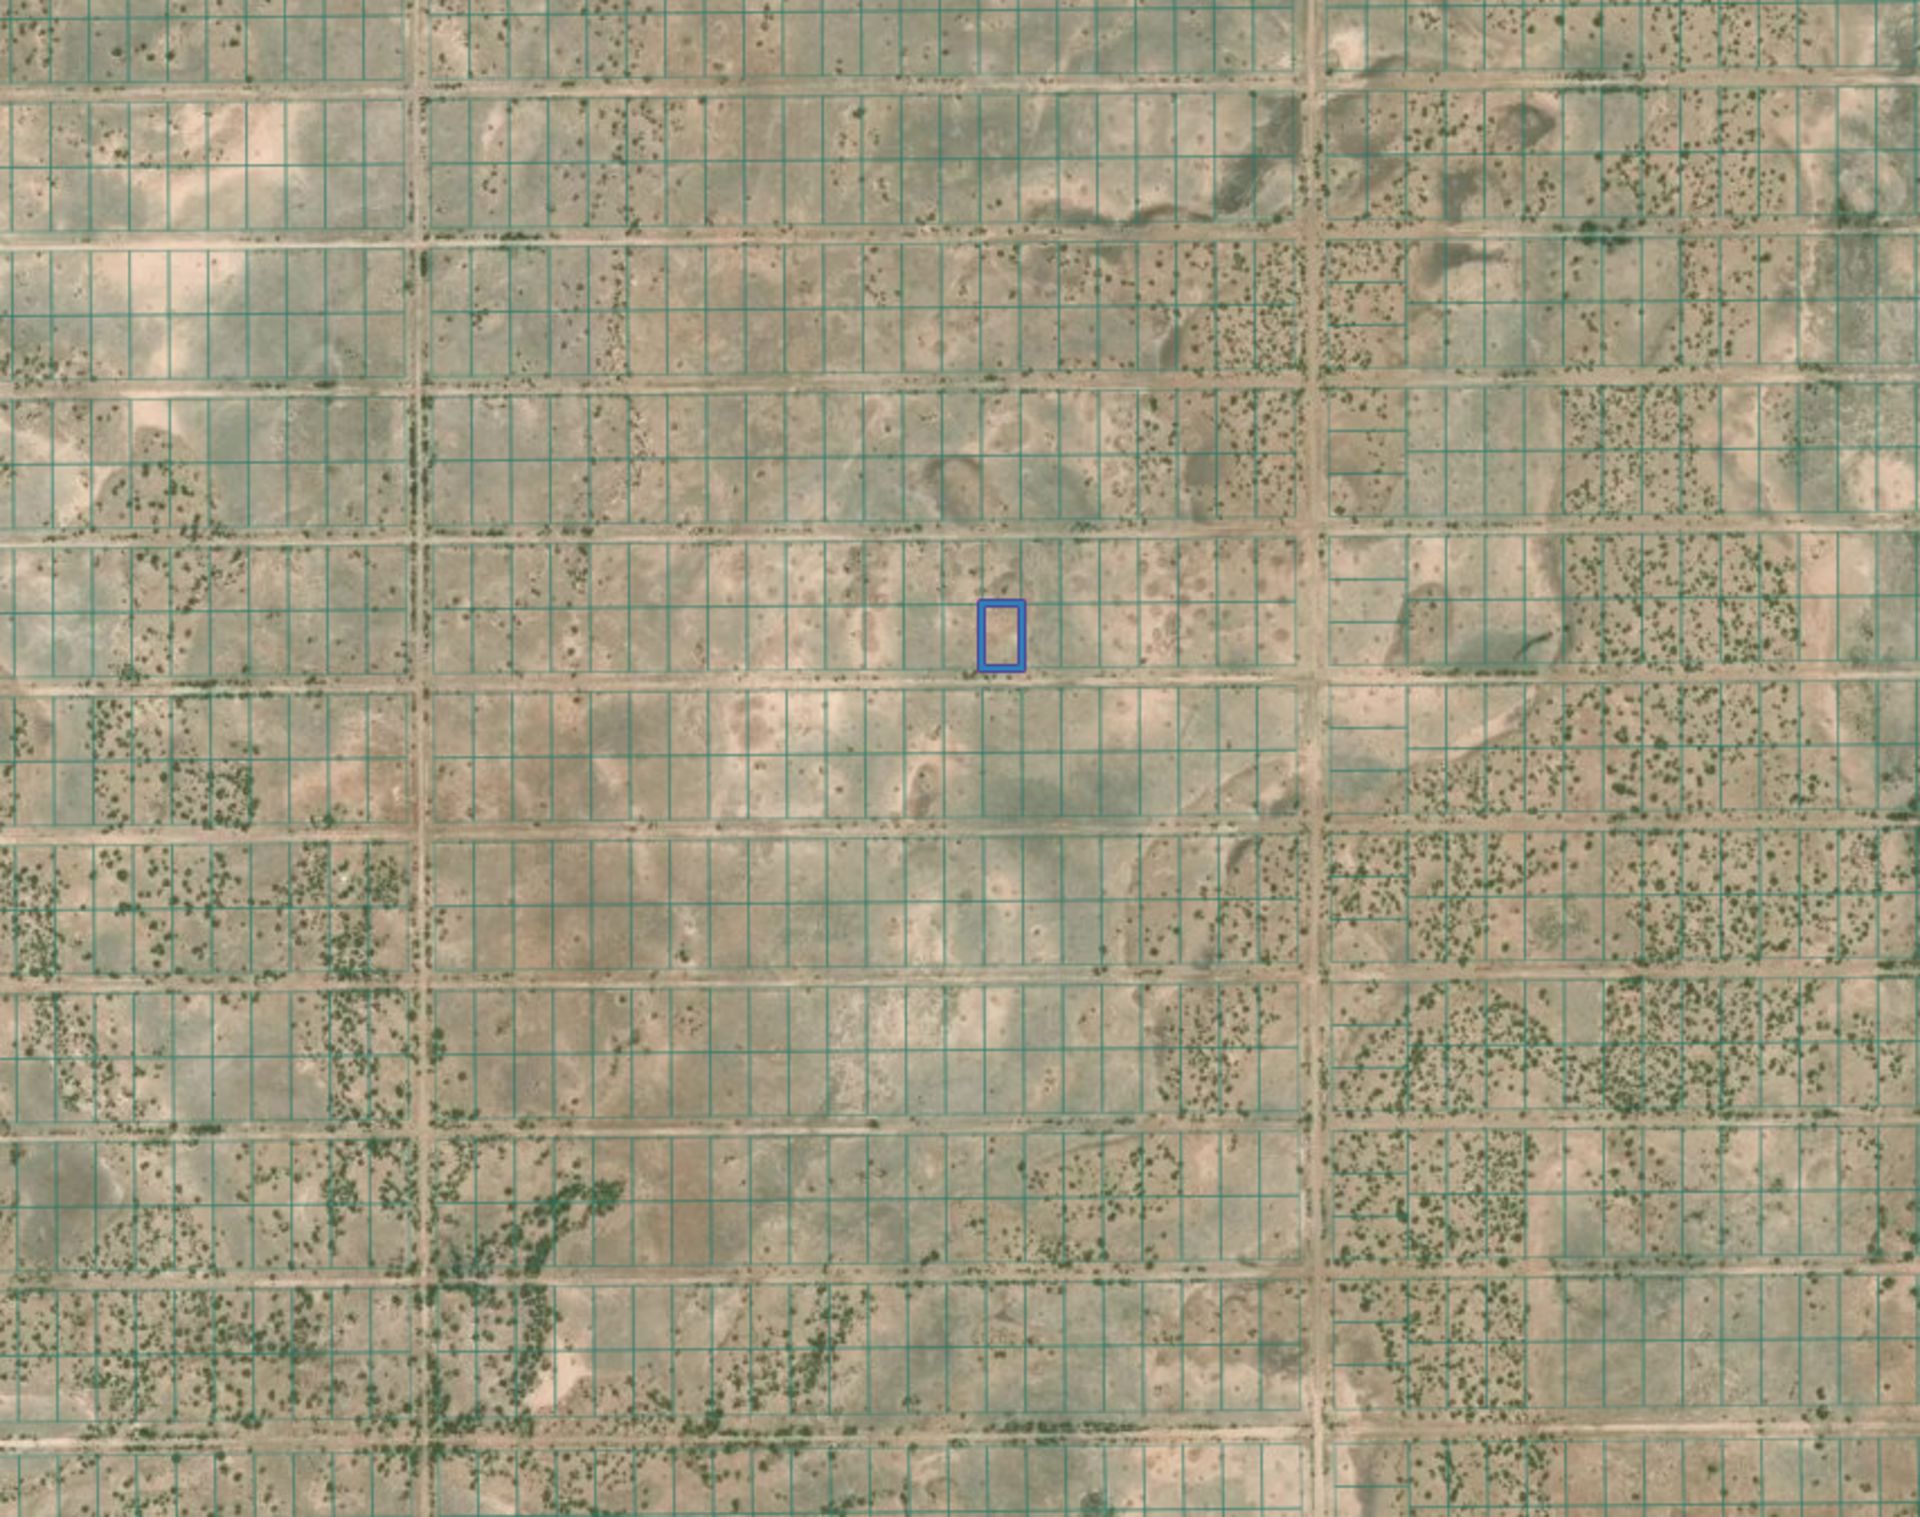 Grab This Half-Acre Lot in Luna County, New Mexico! - Image 8 of 14